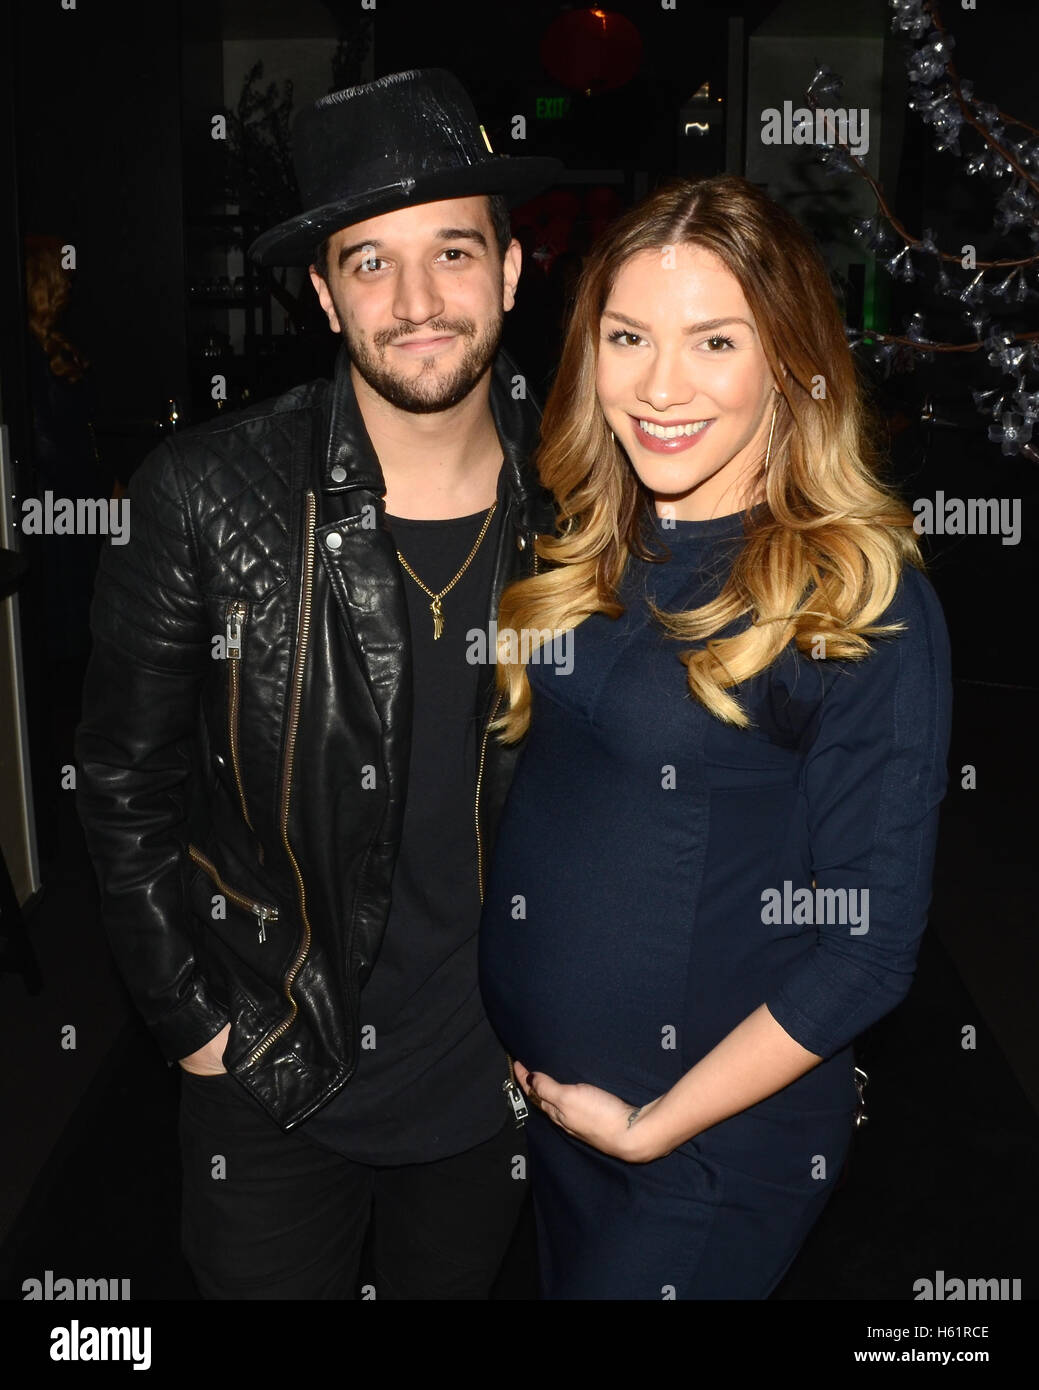 Mark Ballas and Allison Holker attends the GBK and Pilot Pen Golden Globes 2016 Luxury Lounge - Day 2 at W Hotel in Hollywood on January 9, 2016 in Hollywood, California. Stock Photo